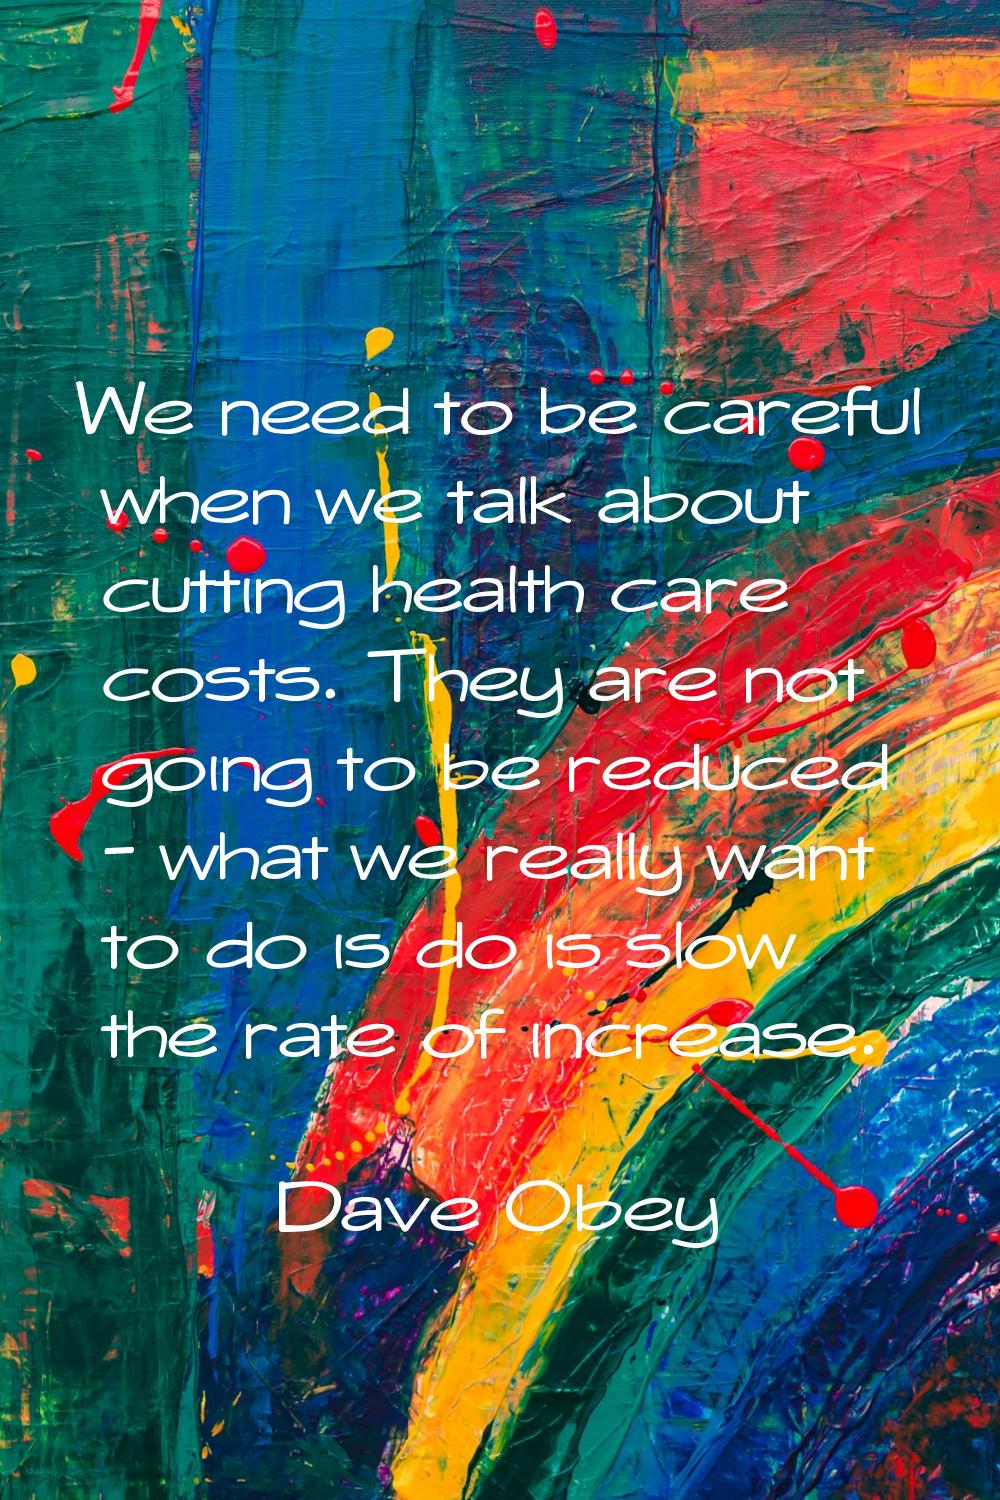 We need to be careful when we talk about cutting health care costs. They are not going to be reduce